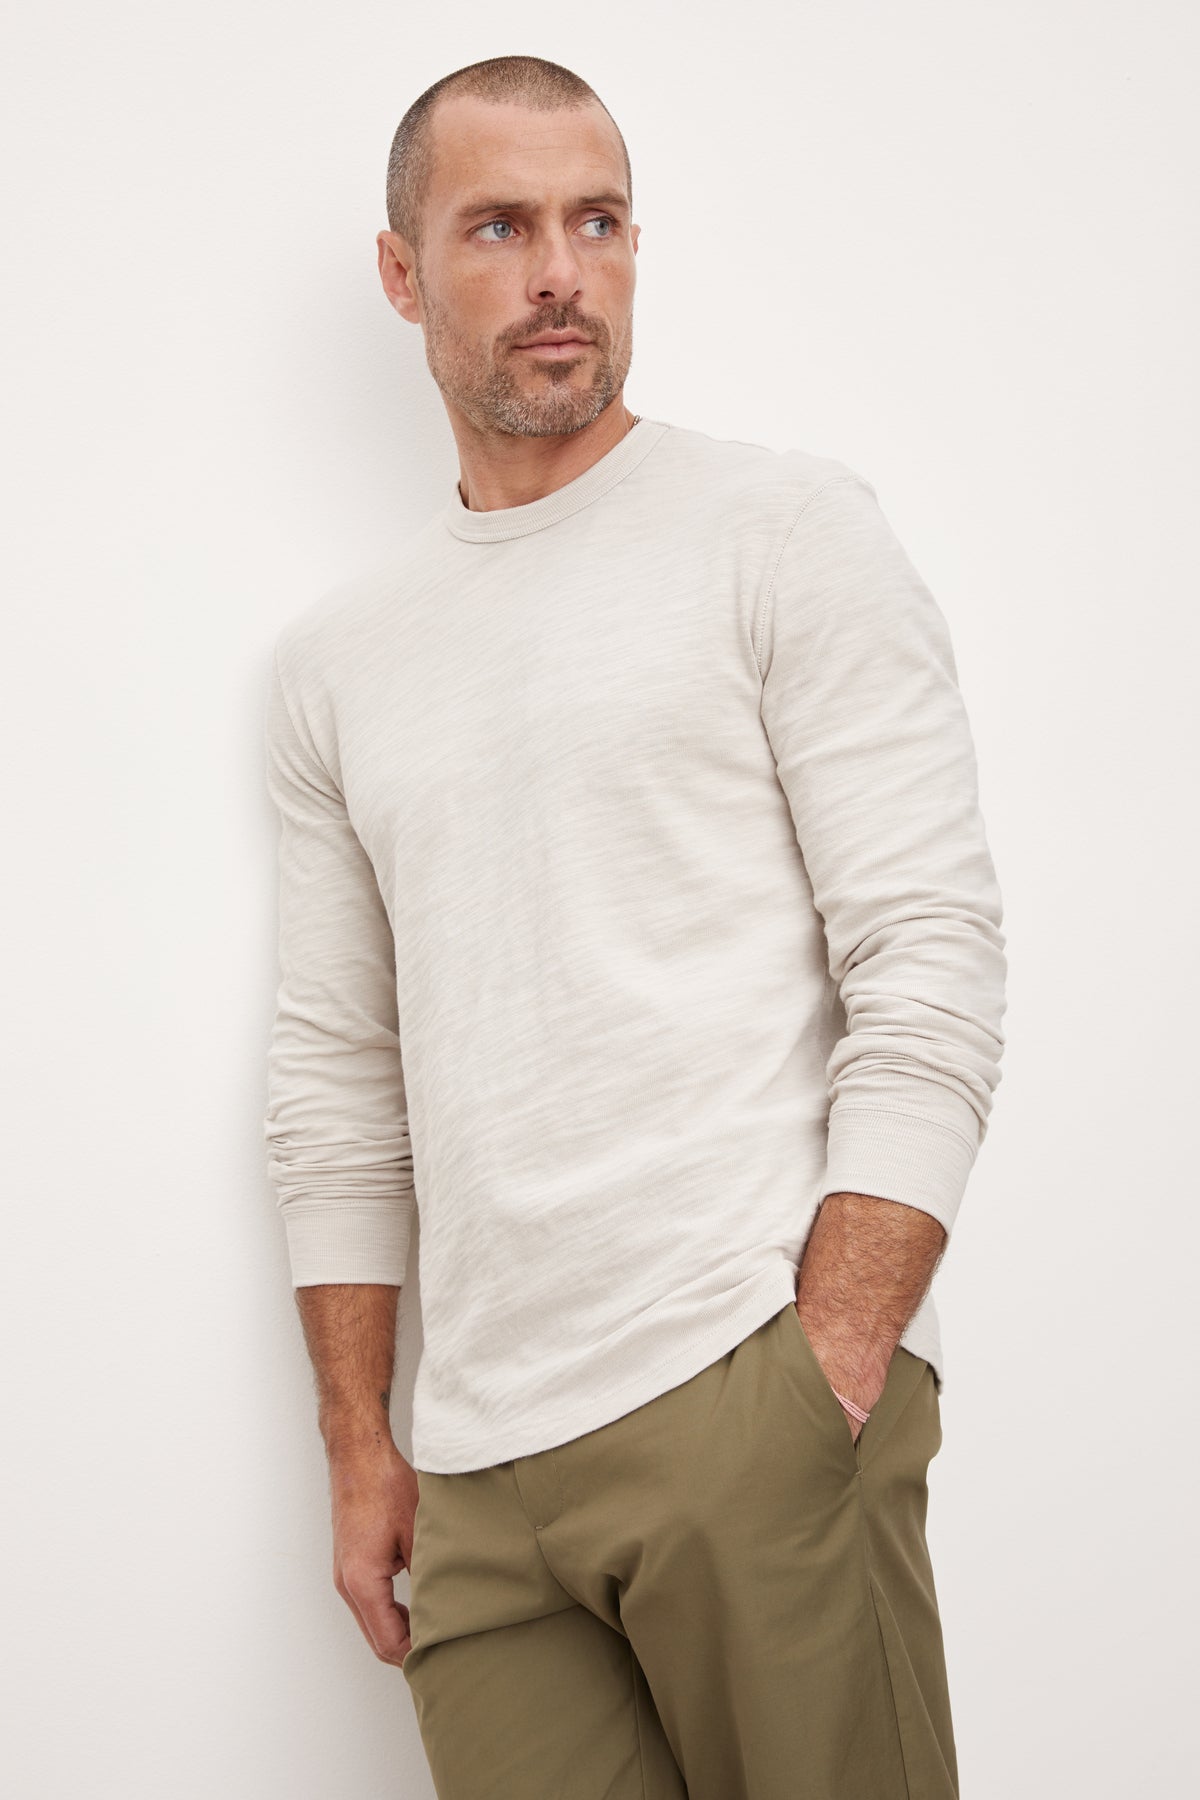 A man wearing a Velvet by Graham & Spencer PALMER CREW NECK TEE and khaki pants.-36008977465537